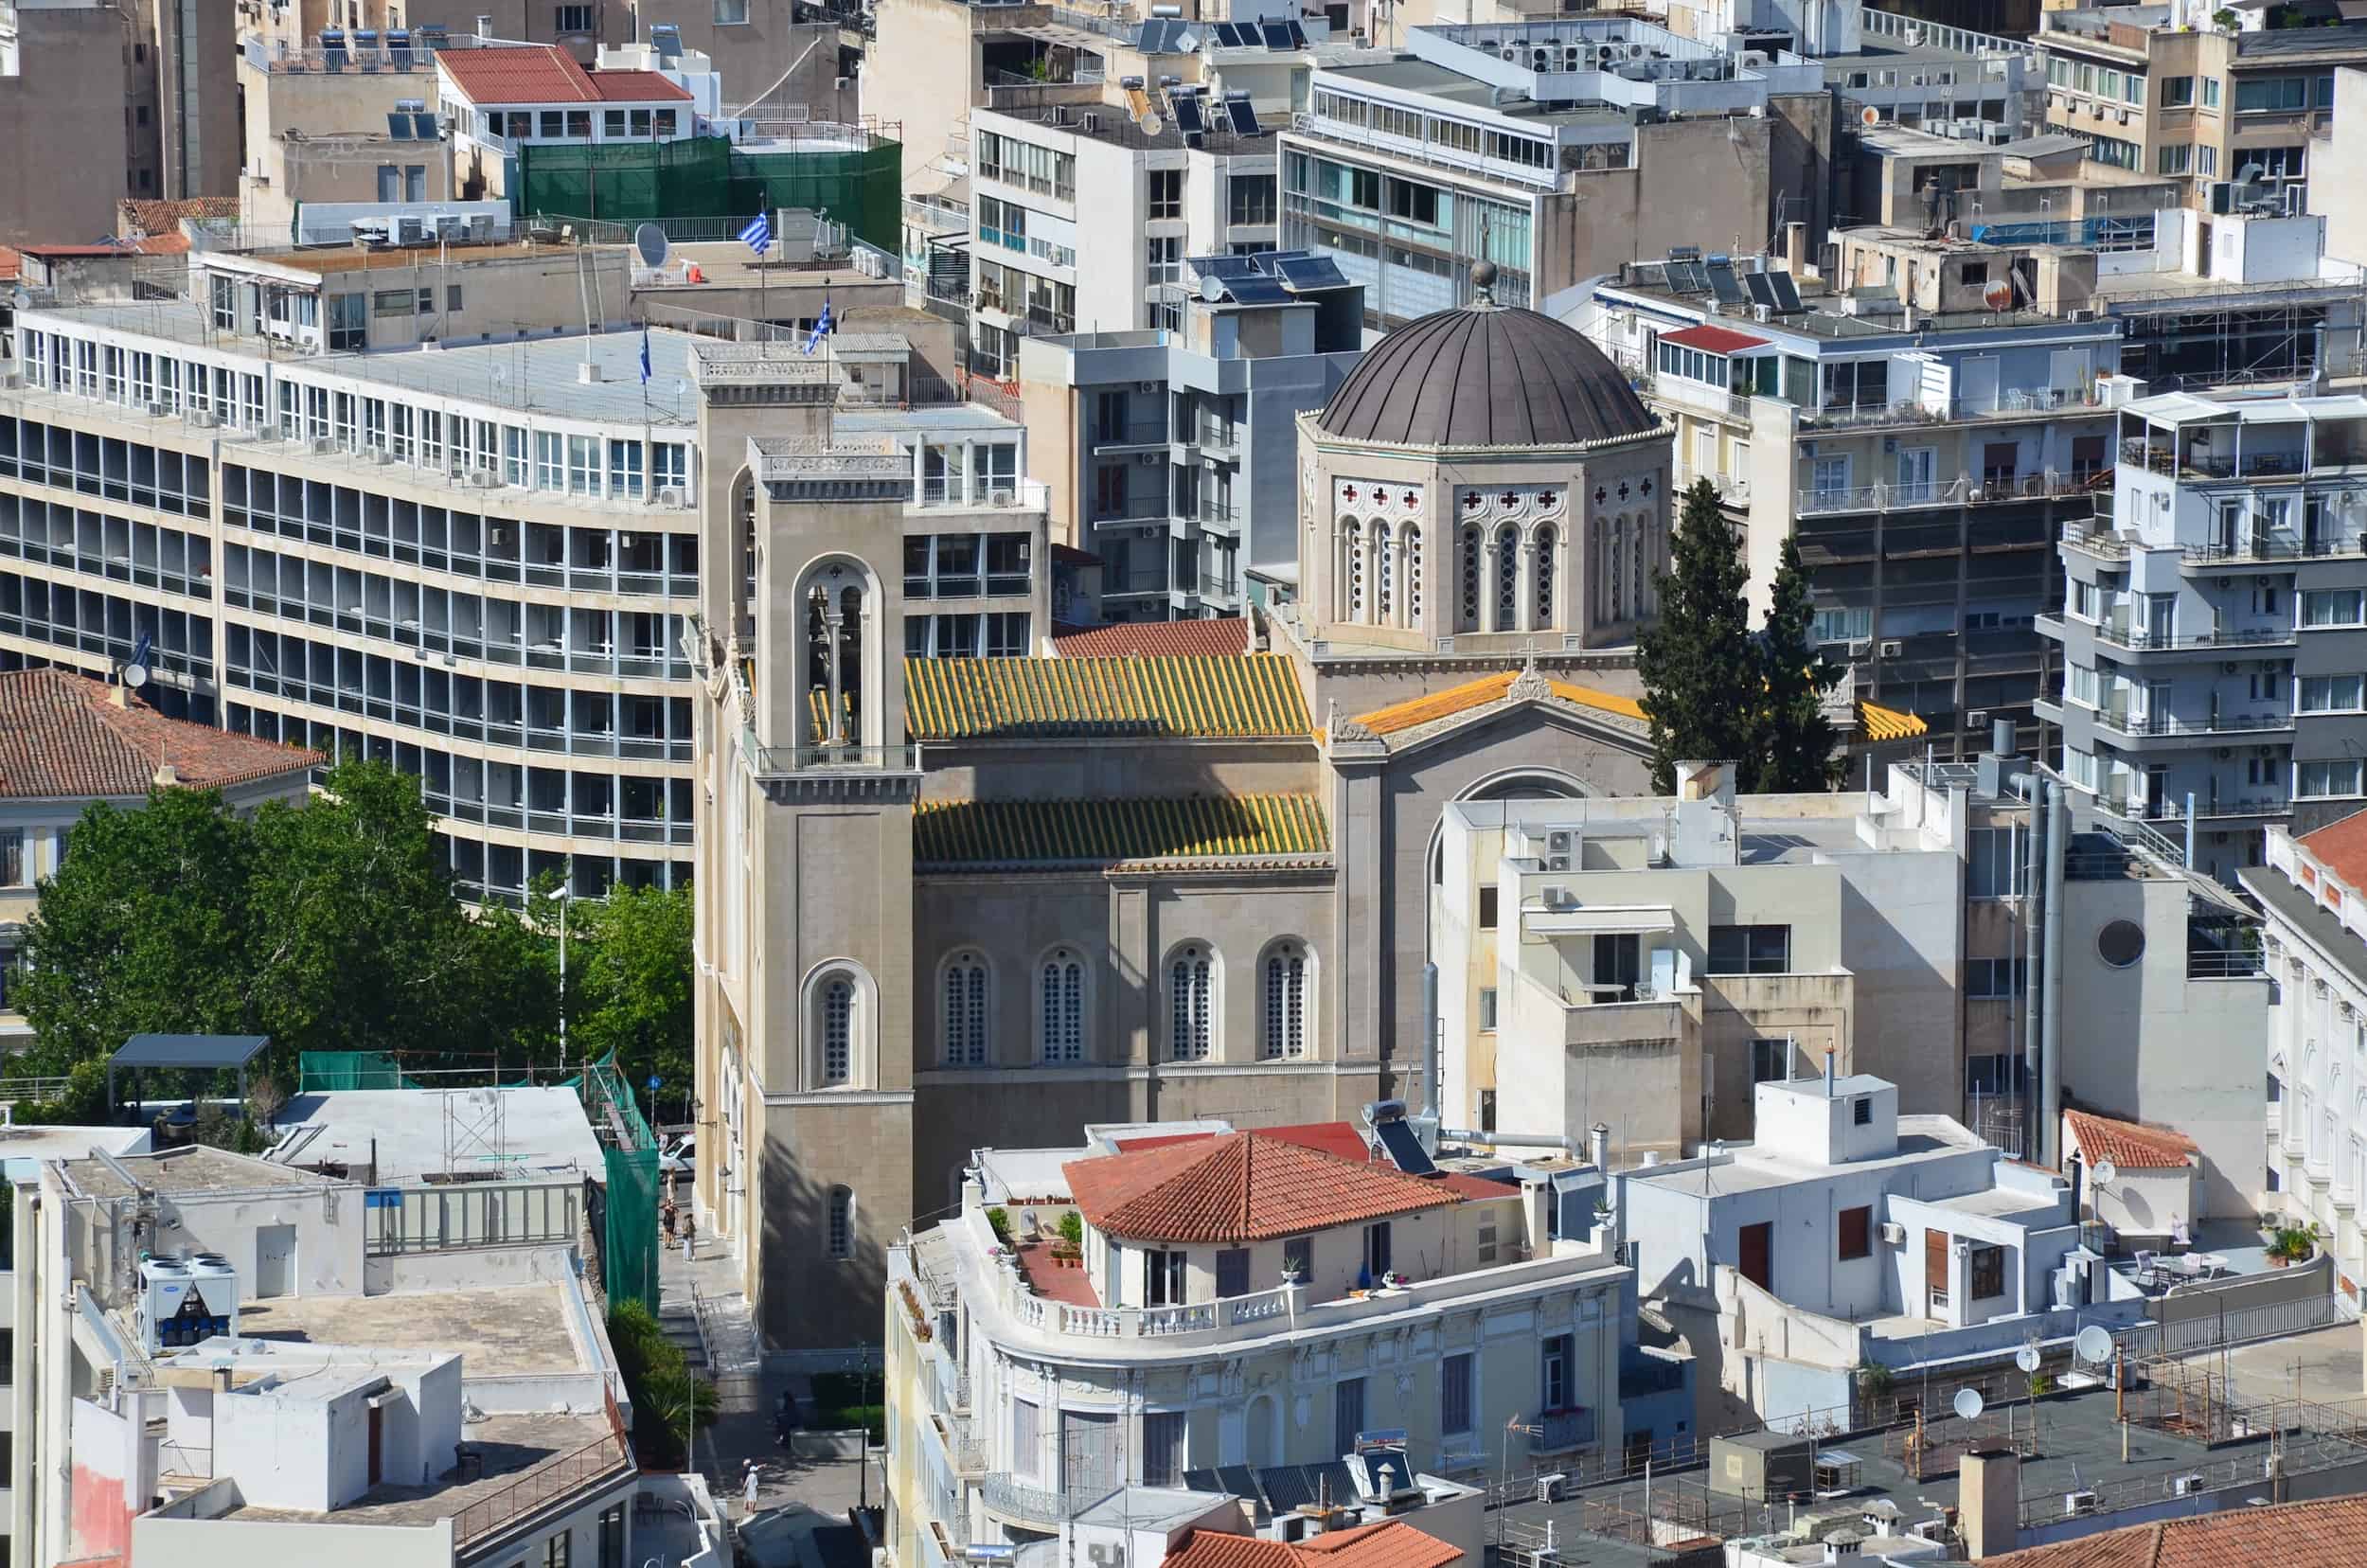 Metropolitan Cathedral of Athens from the Acropolis